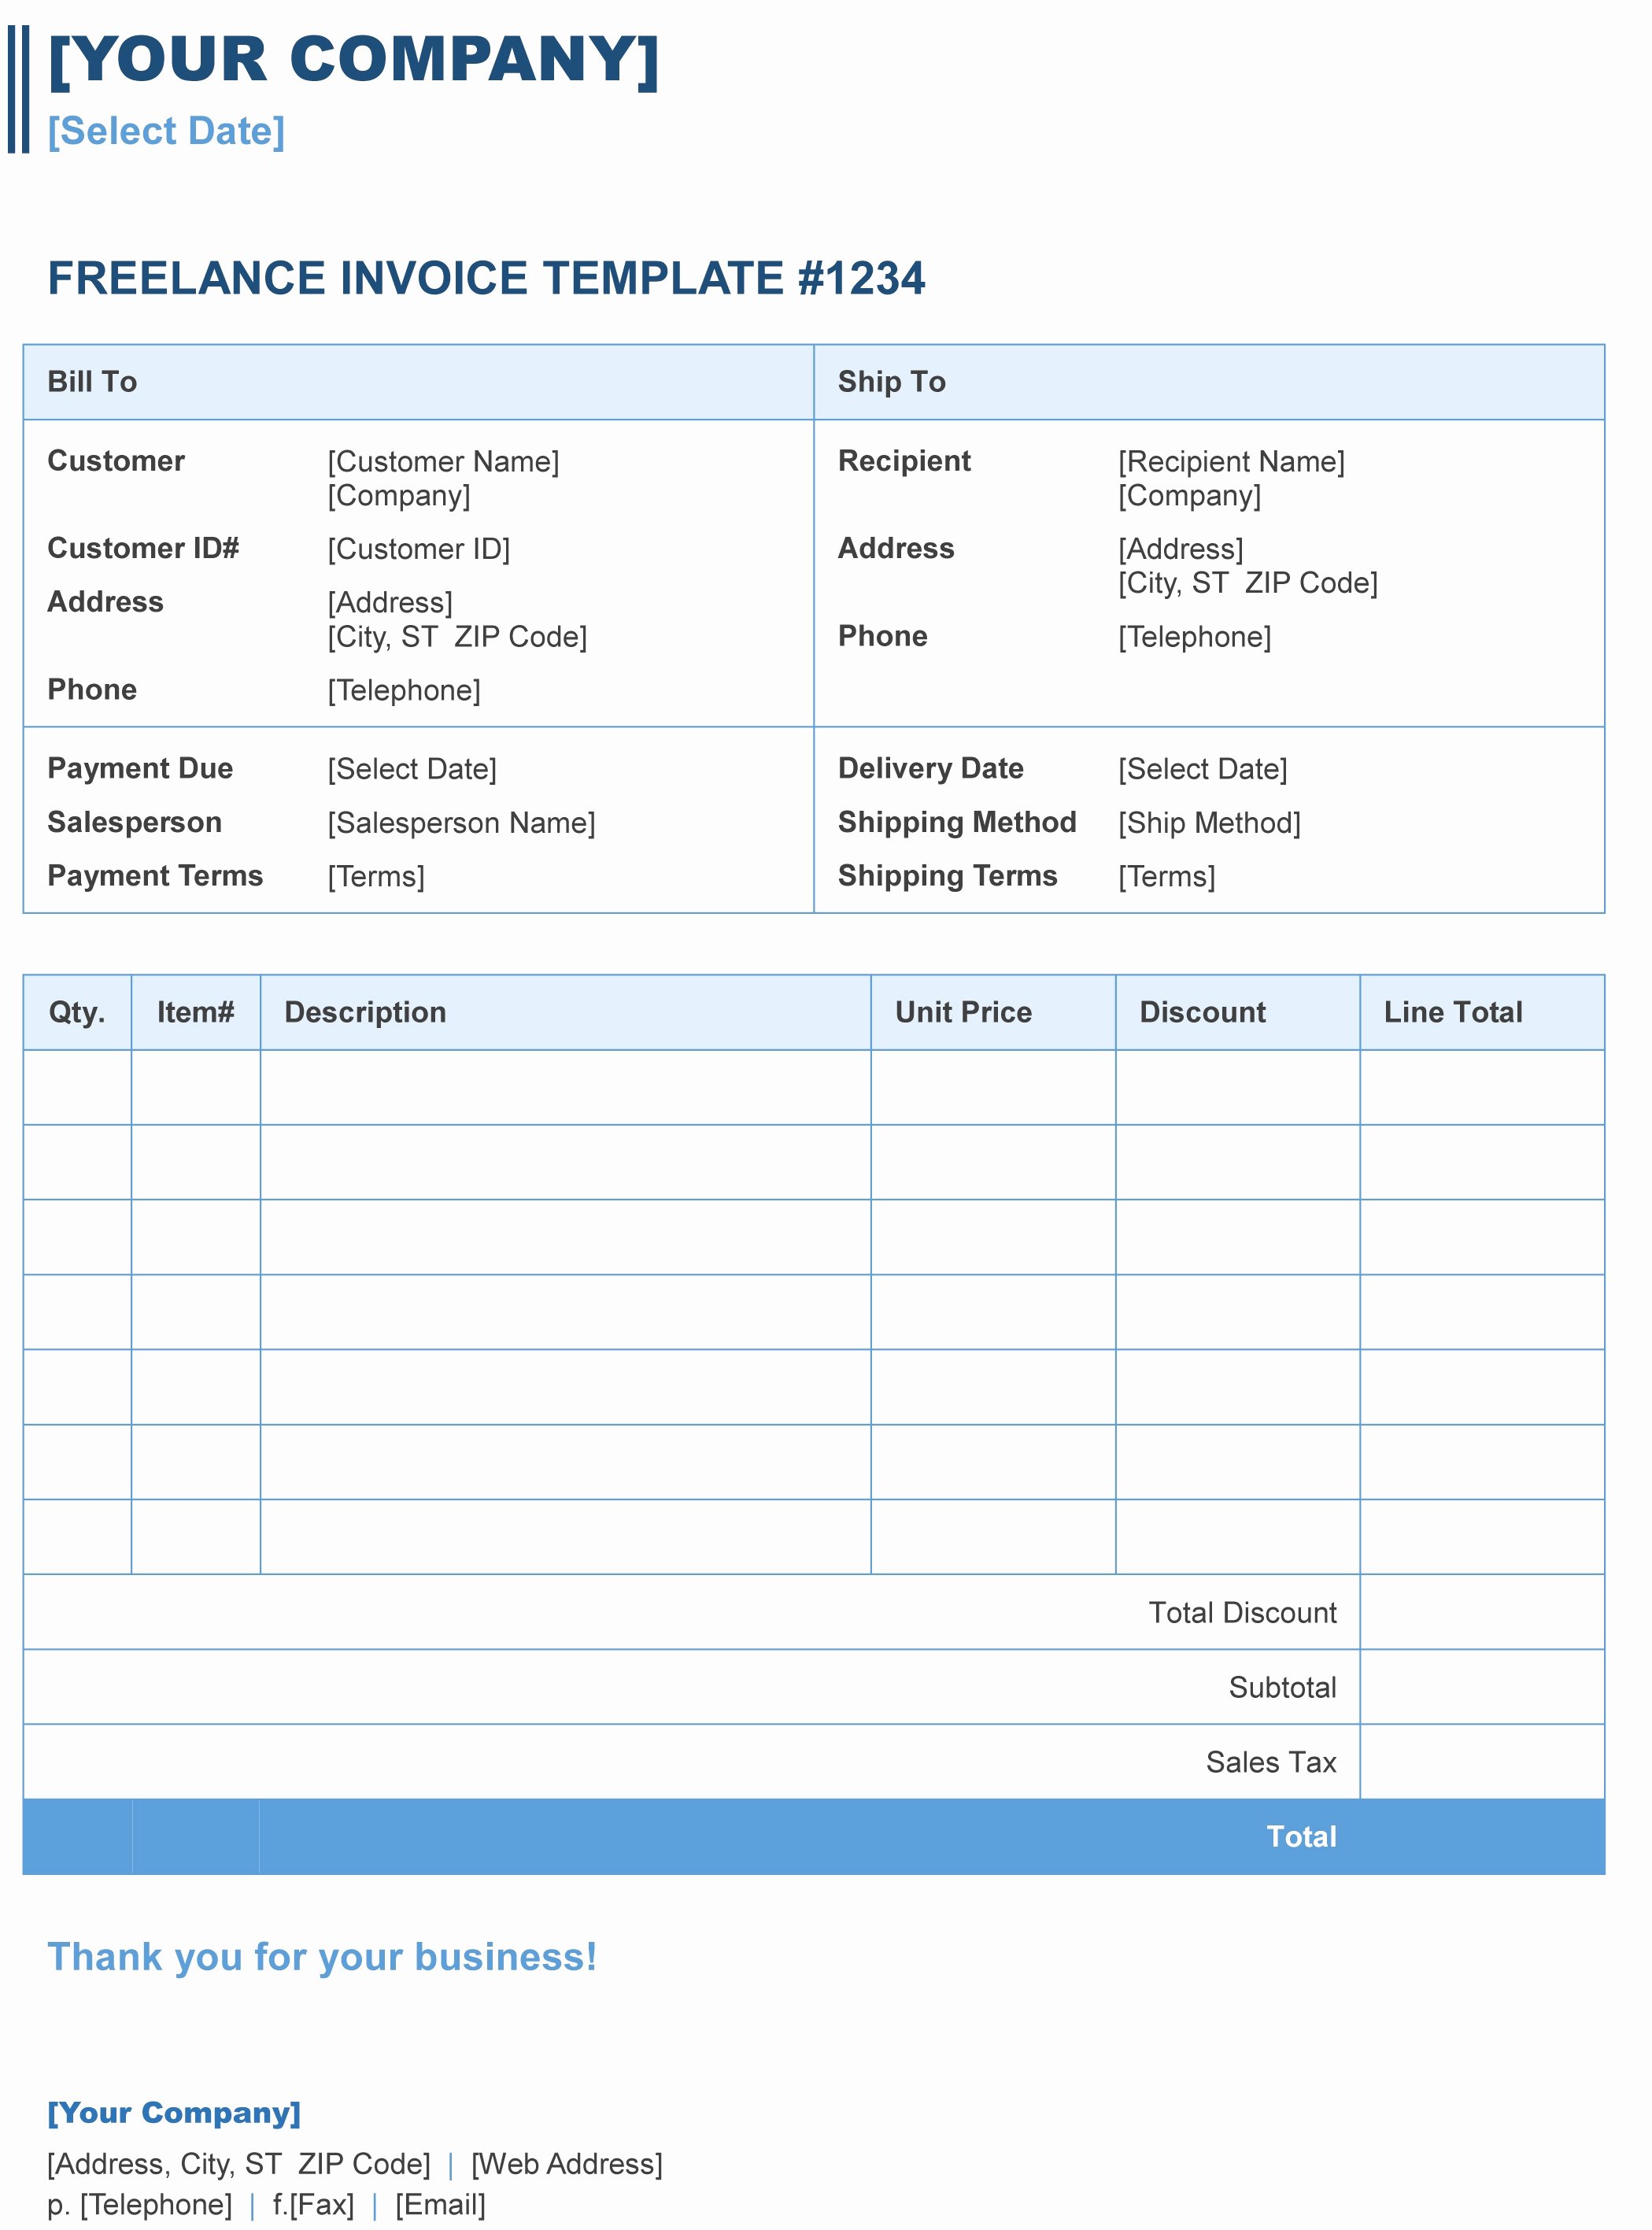 Free Billing Invoice Template Best Of Freelance Invoice Template Free